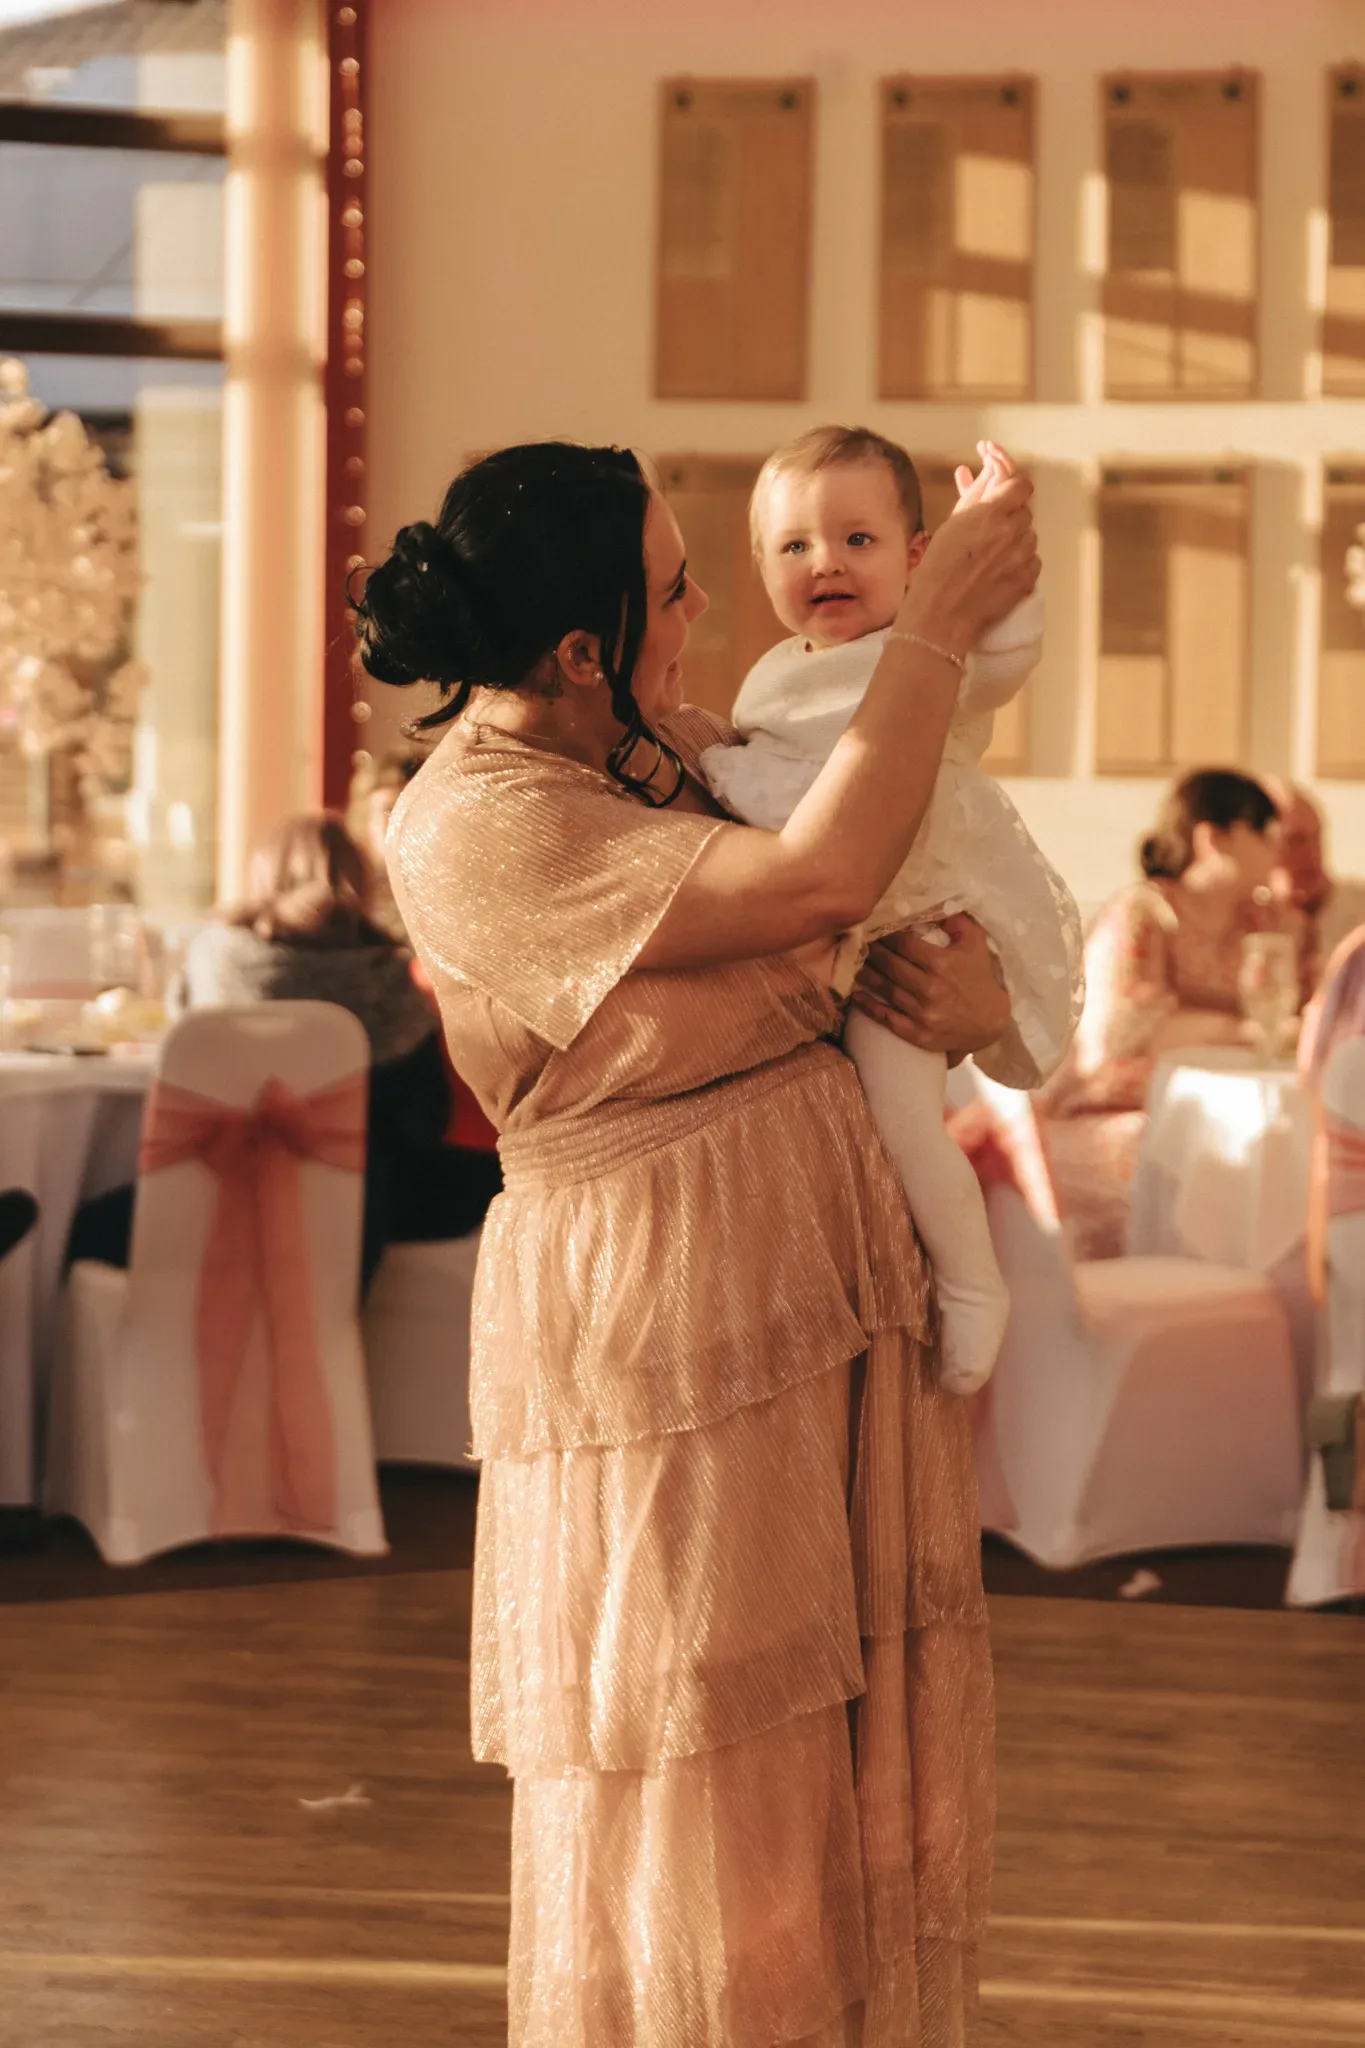 A woman in an elegant, shimmering pink dress holds a smiling baby in a white outfit at a festive event with decorated tables and chairs in the background.